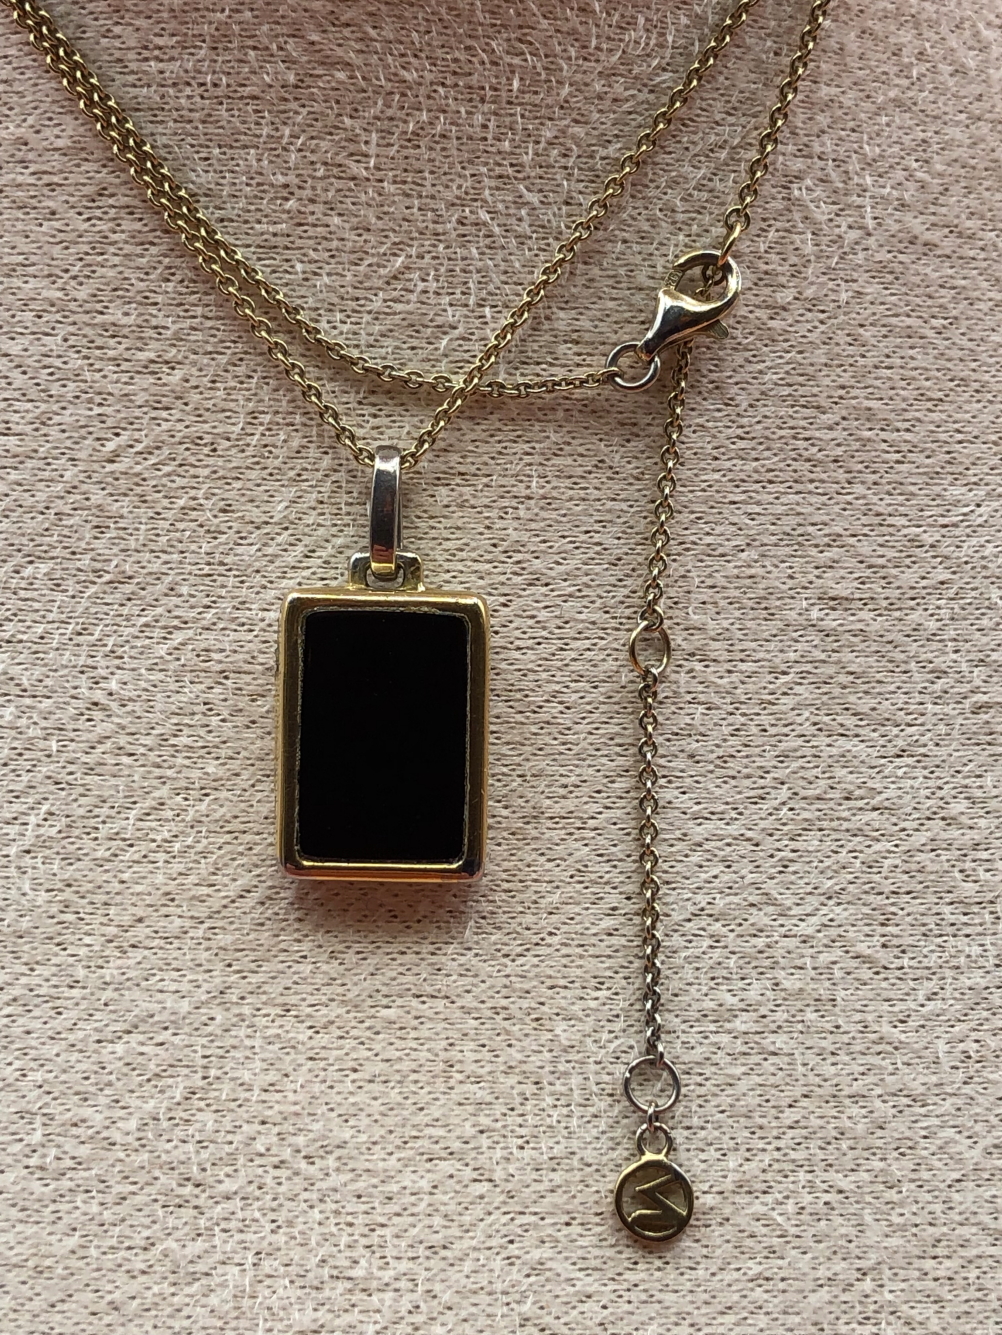 A MONICA VINADER SIREN TEARDROP PENDANT AND CHAIN TOGETHER WITH A MEJURI BLACK ONYX AND SILVER - Image 2 of 8